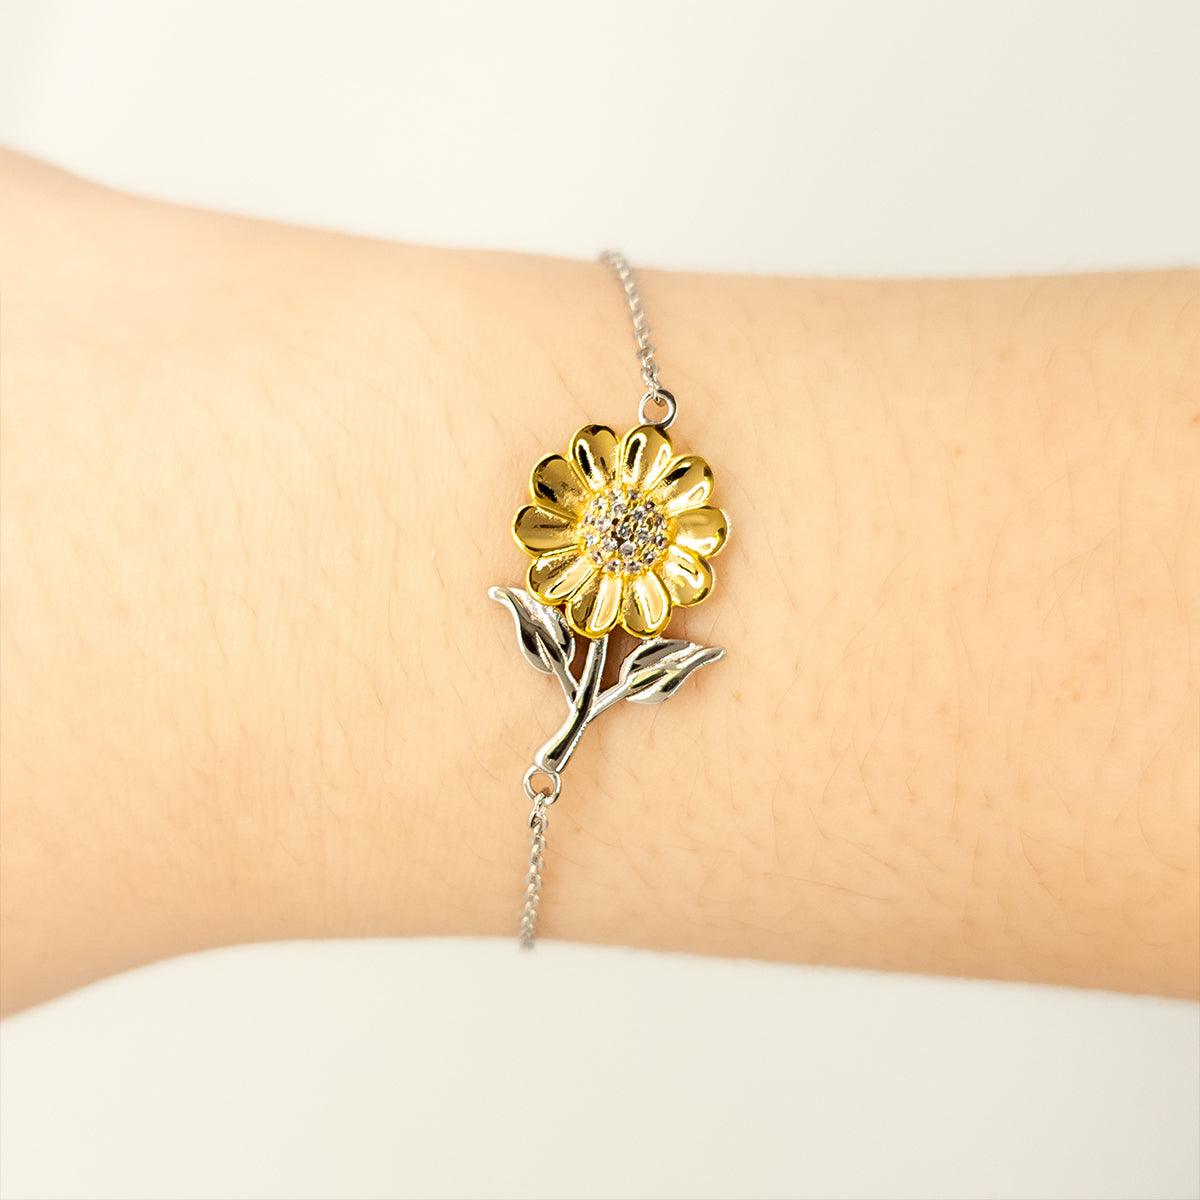 Remarkable Mental Health Counselor Gifts, Your dedication and hard work, Inspirational Birthday Christmas Unique Sunflower Bracelet For Mental Health Counselor, Coworkers, Men, Women, Friends - Mallard Moon Gift Shop